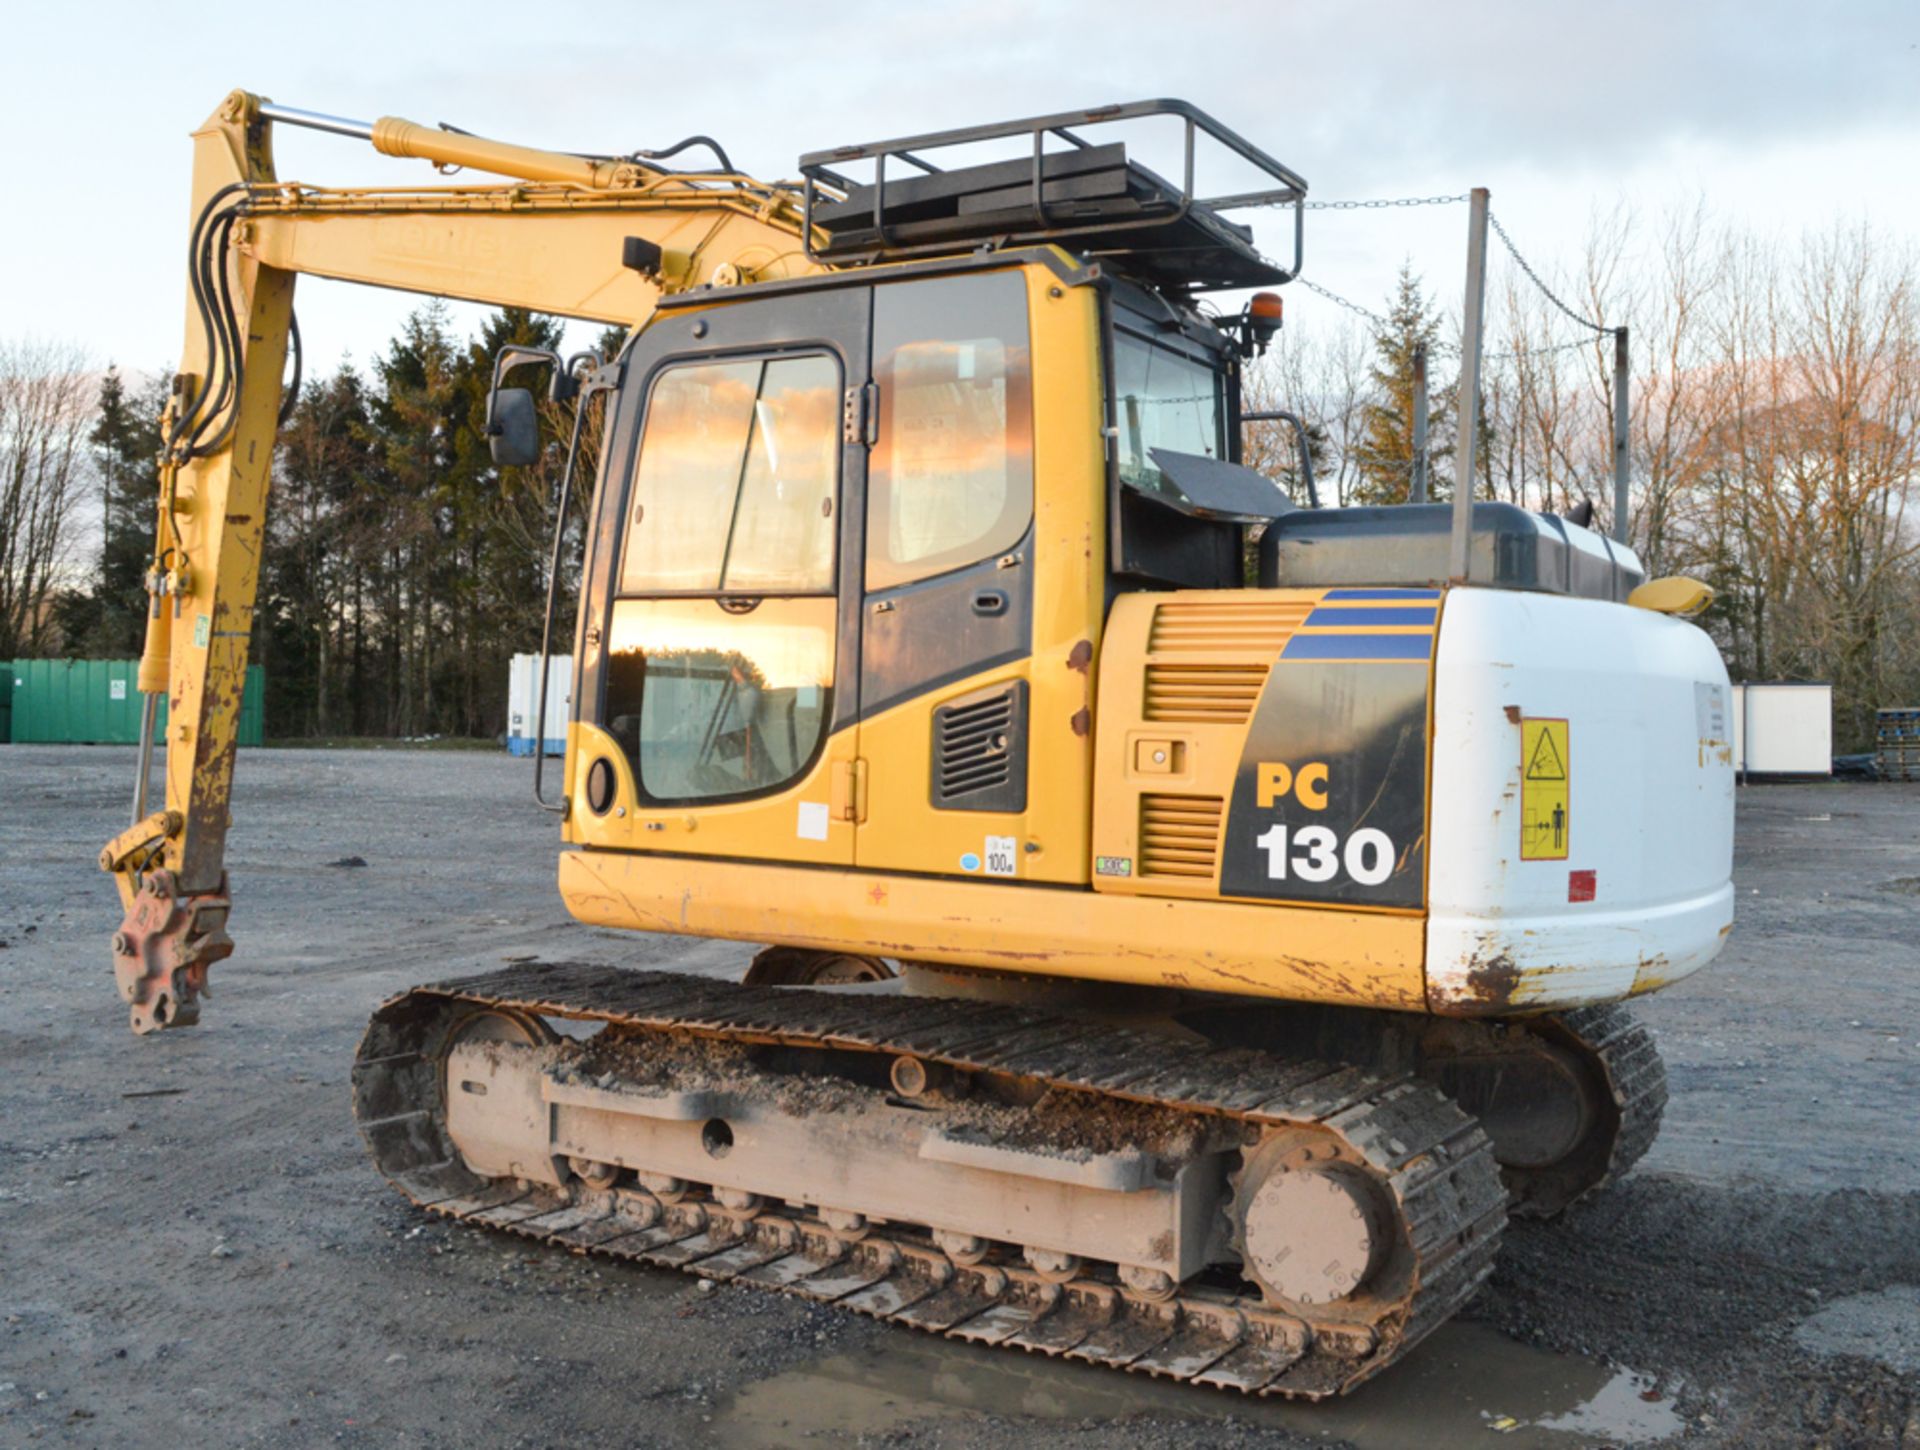 Komatsu PC130-8 13 tonne steel tracked excavator Year: 2010 S/N: C30113 Recorded Hours: 5998 1 - Image 2 of 13